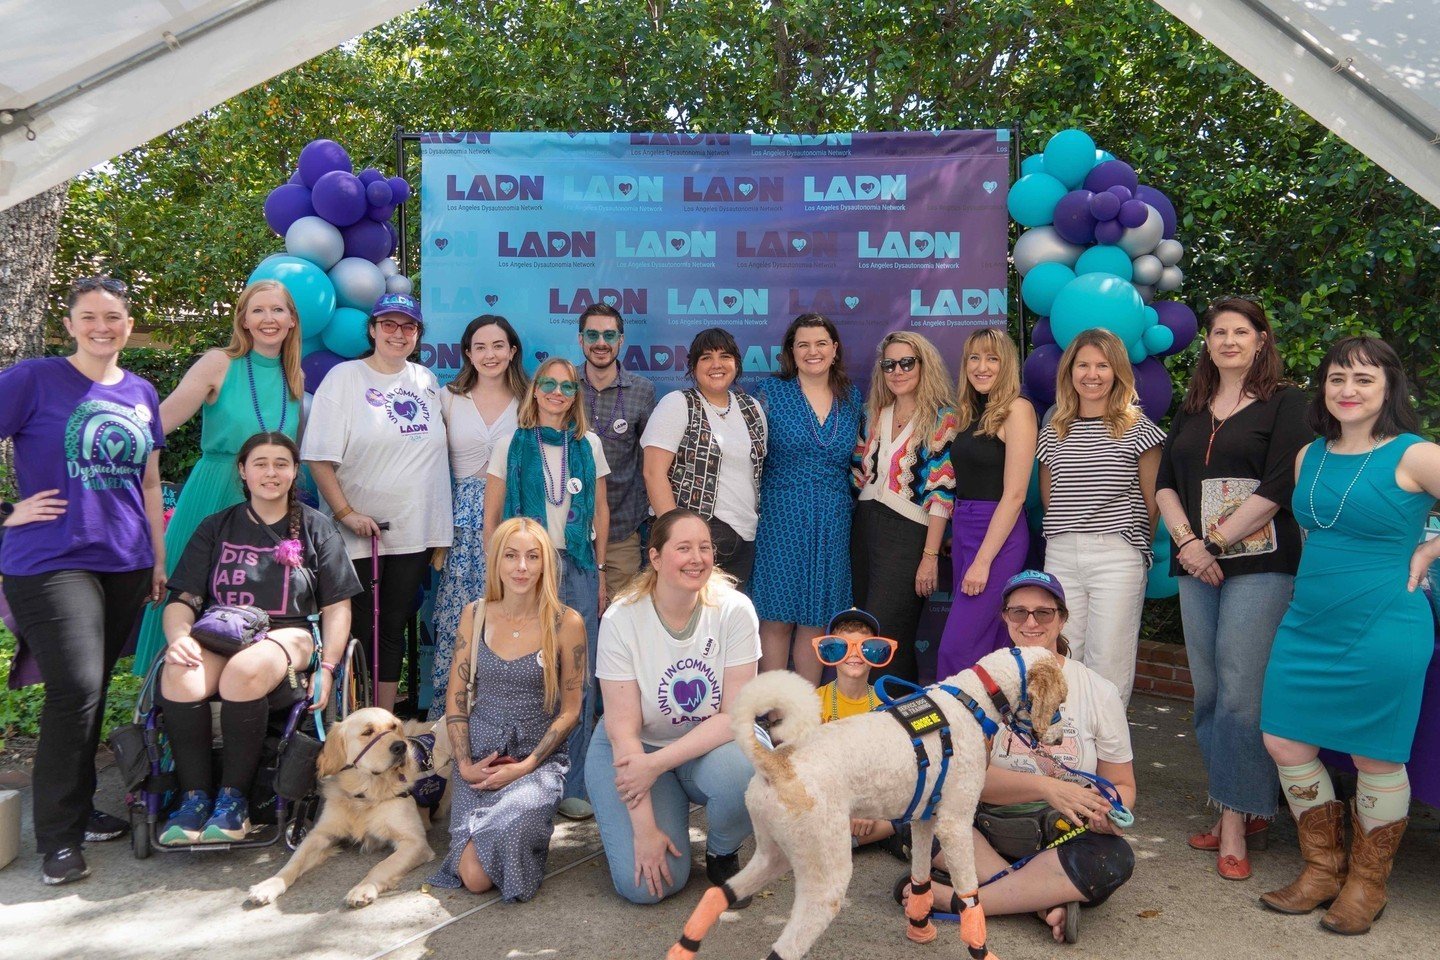 We love our LADN community so much! 🫶 It was so much fun to celebrate together at our Unity in Community event on Sunday! Thank you to everyone who came to show their support of LADN! We are so overwhelmed with gratitude! 💜💙⁠
⁠
Thank you also to a